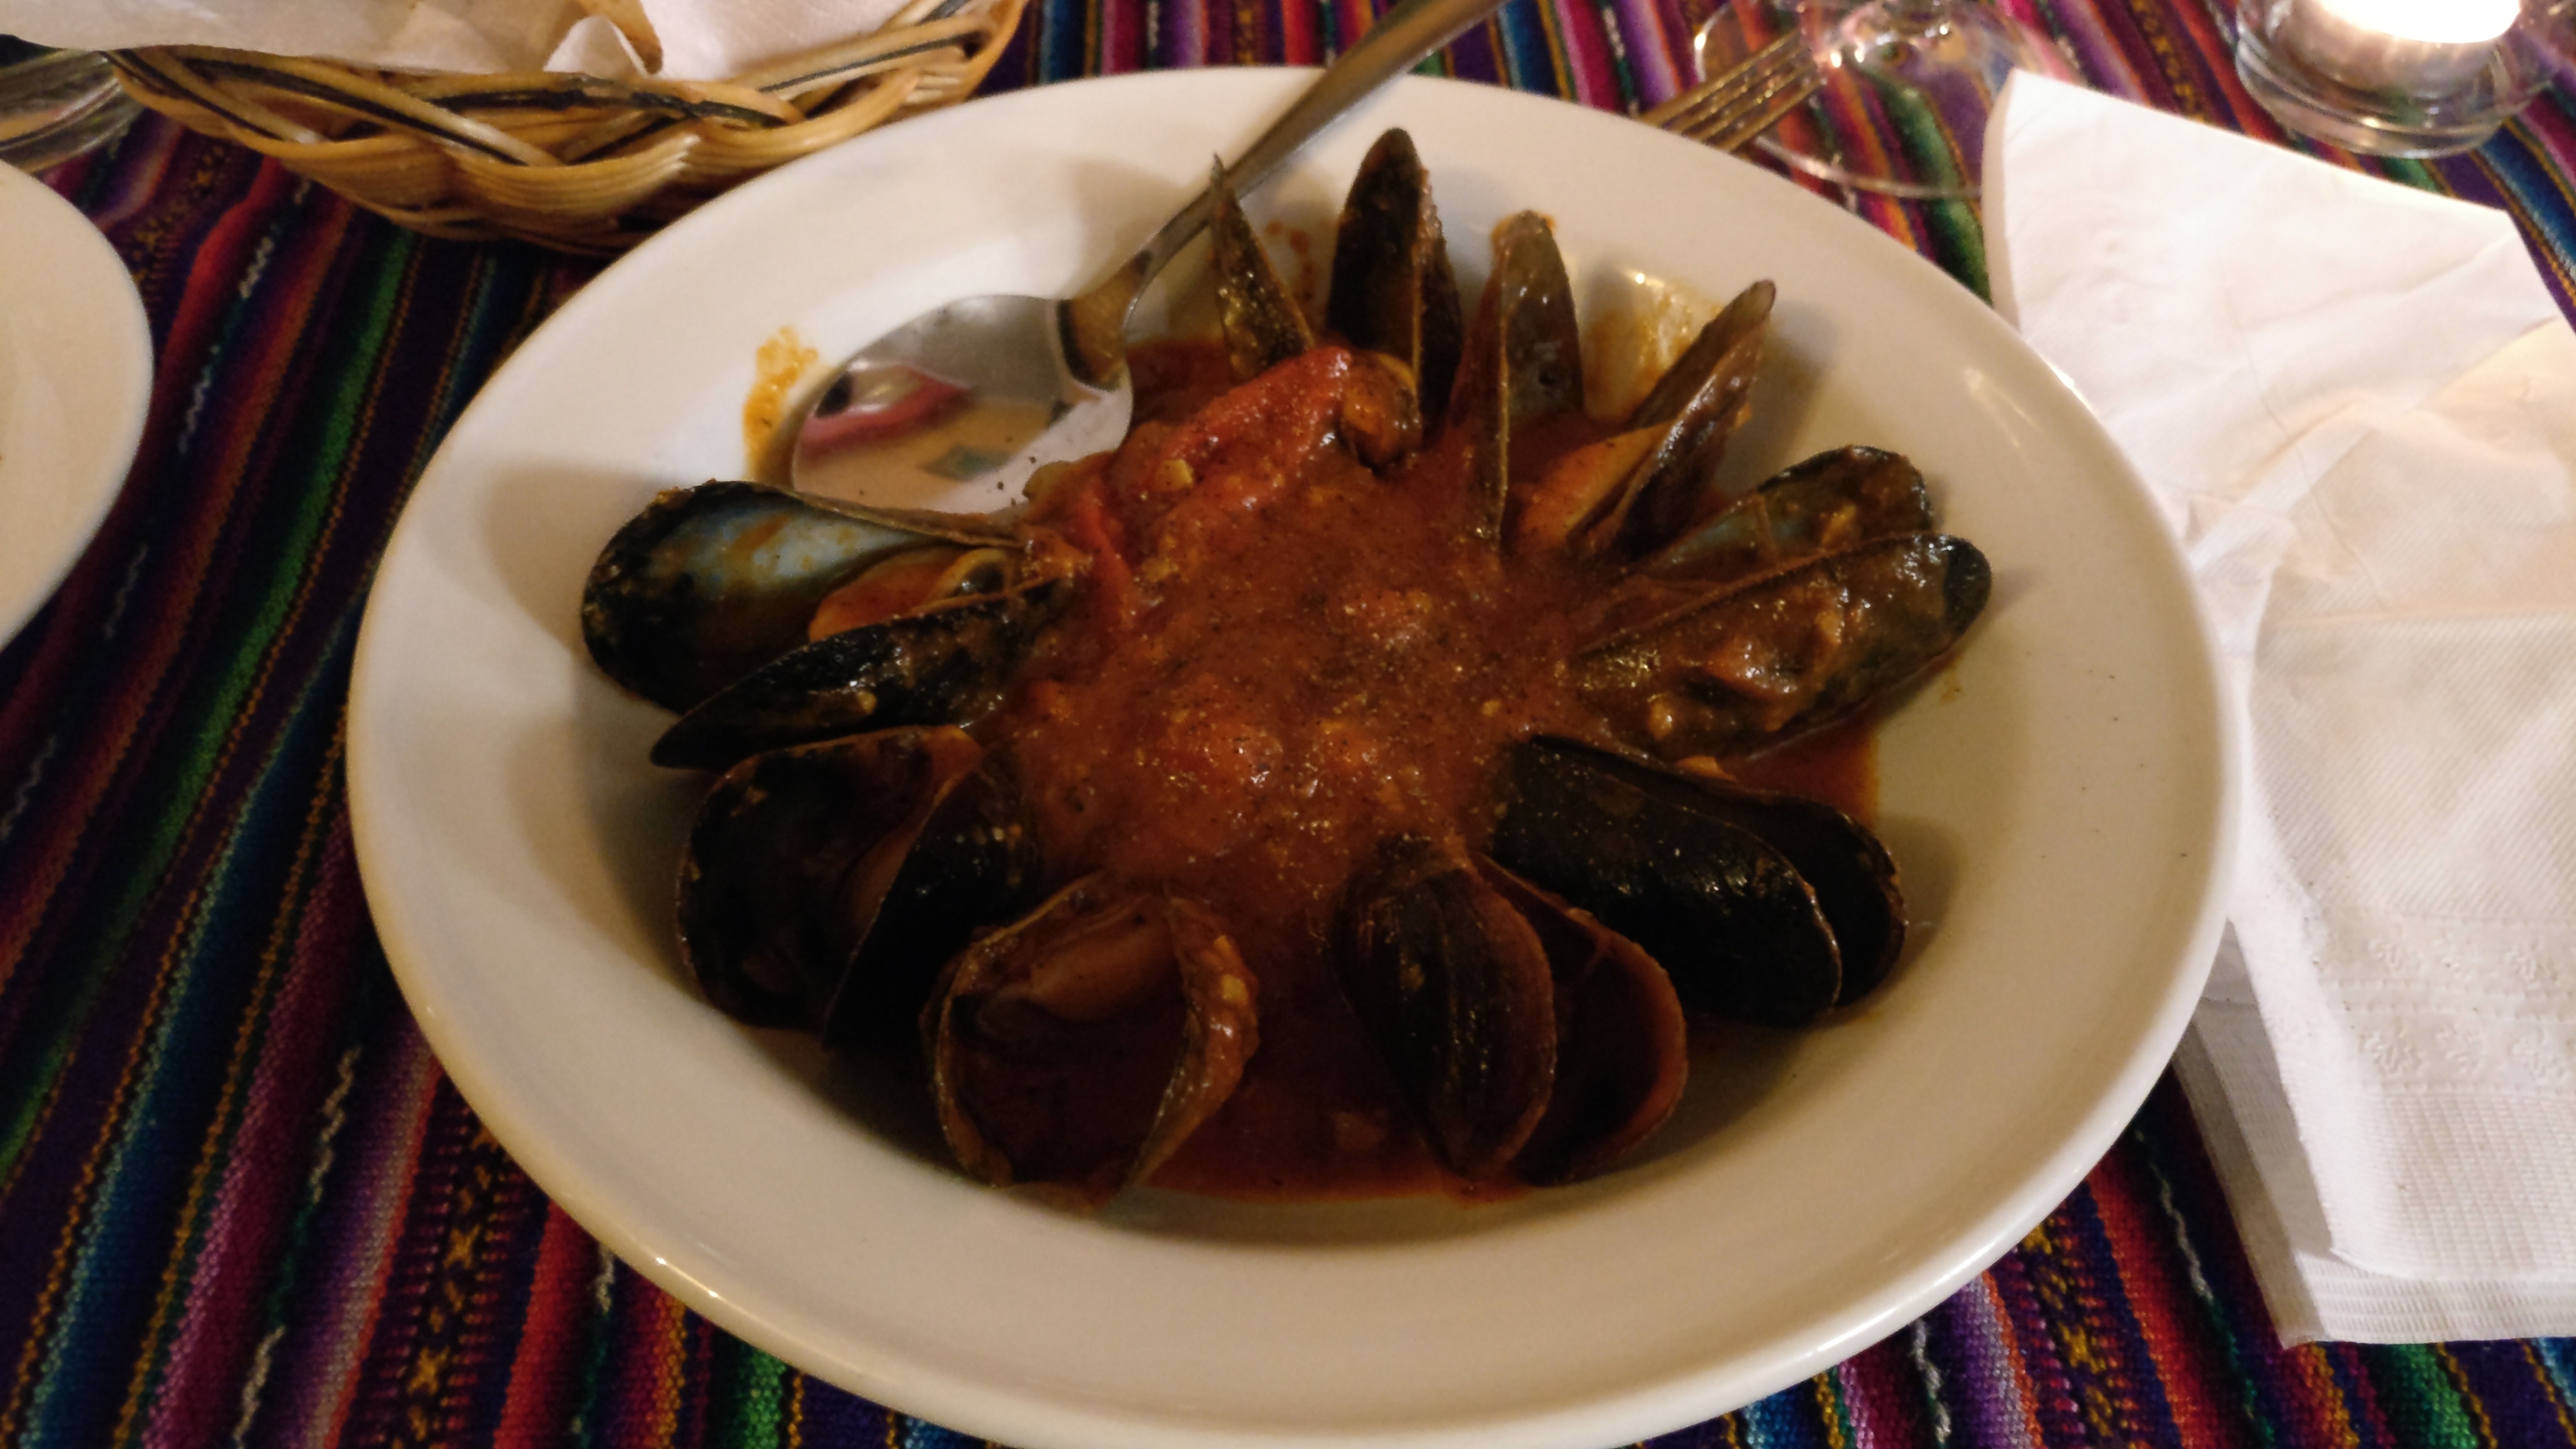 Mussels arranged in a circle with a spiced tomato sauce